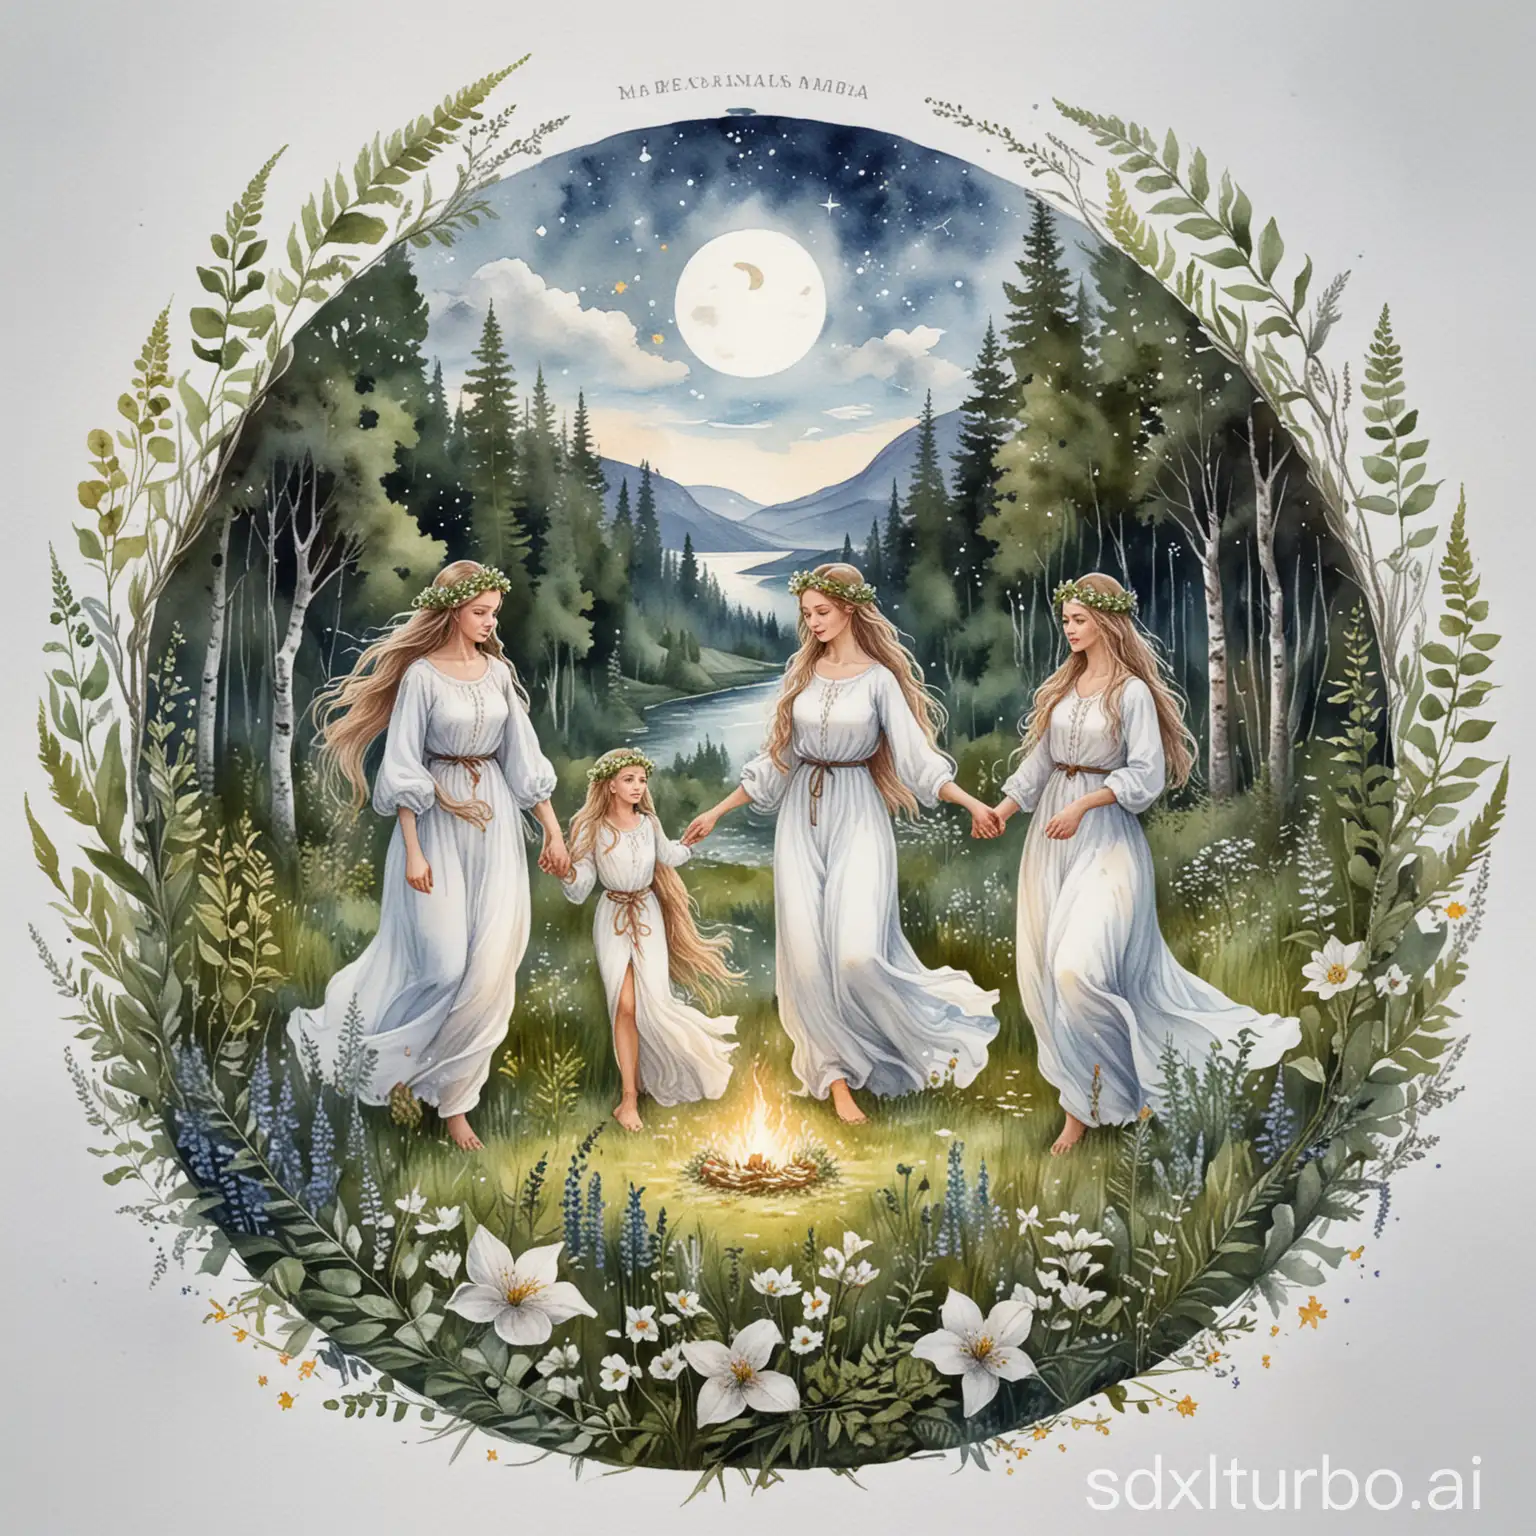 round shape logo with midsummer night aesthetics, dense russian forest, birch trees, the stars, round dance of 3 slavic mermaids with long hair wearing white shirts and flower wreaths, ferns and herbs and flowers,  medieval russian village   on a distant hill, aquarelle style, magical, silver pigment, watercolor drawing